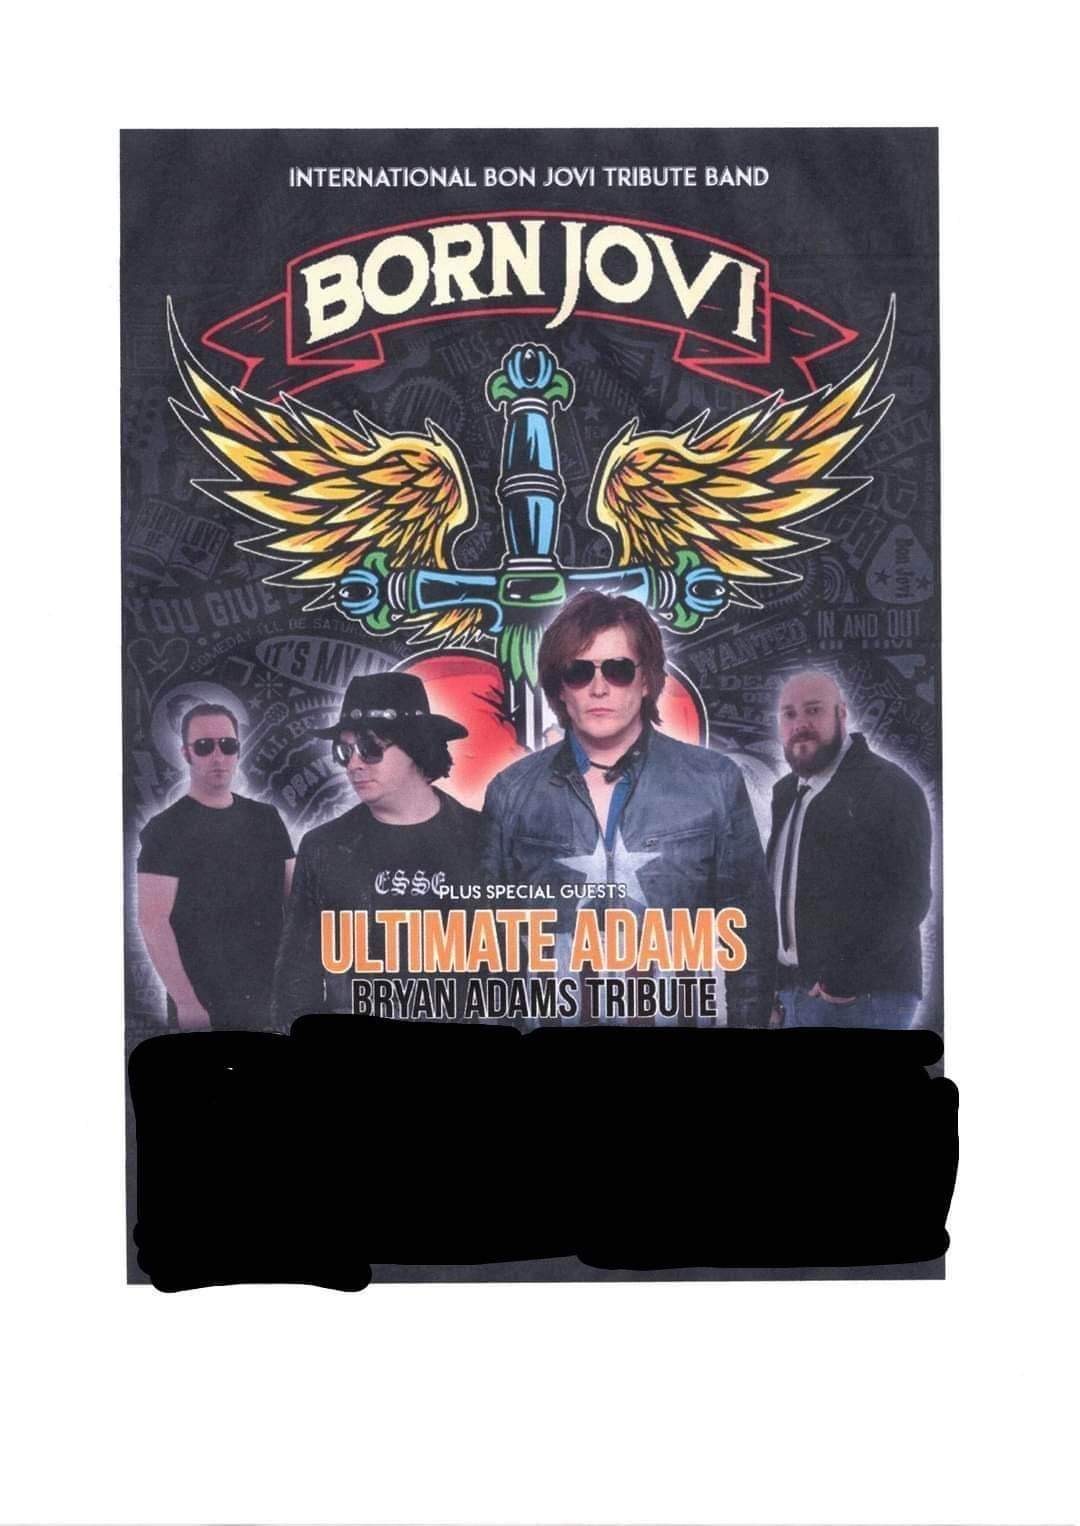 Bon jovi v Bryan adams  on Apr 08, 19:30@Wisbech St.Mary Community Centre - Buy tickets and Get information on whittlesey music nights 